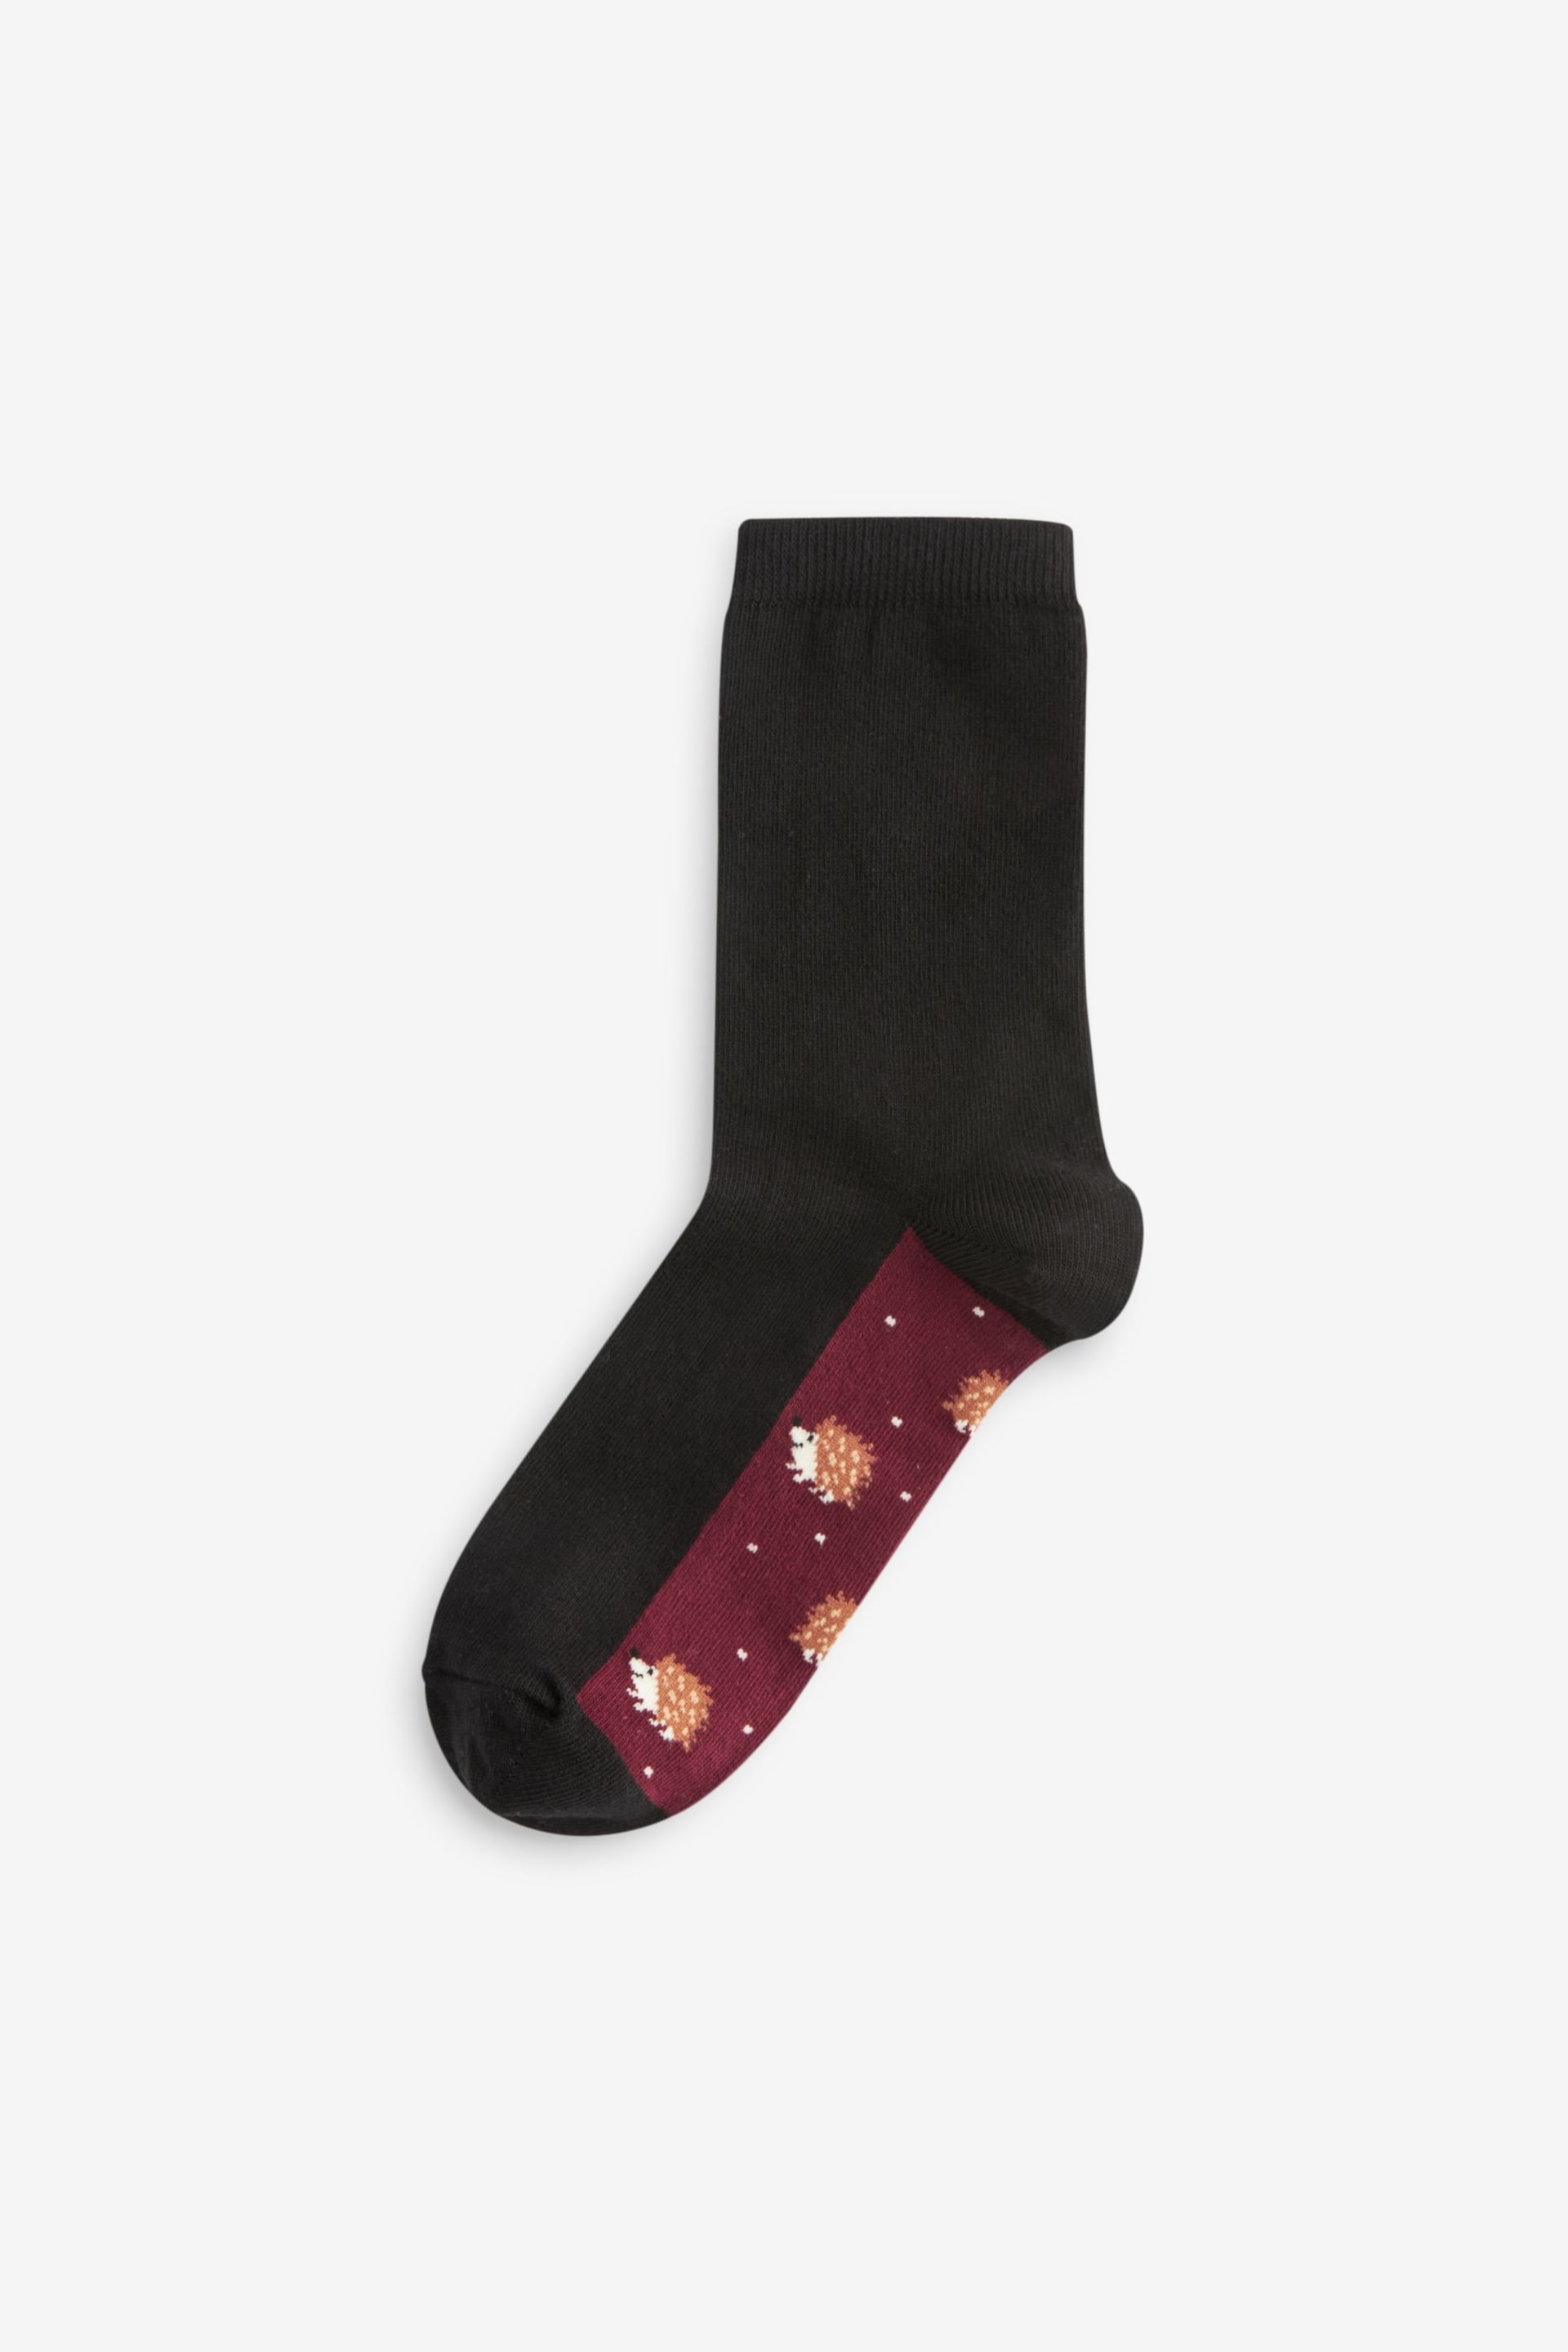 Autumn Animals Footbed Ankle Socks 5 Pack - Image 3 of 6